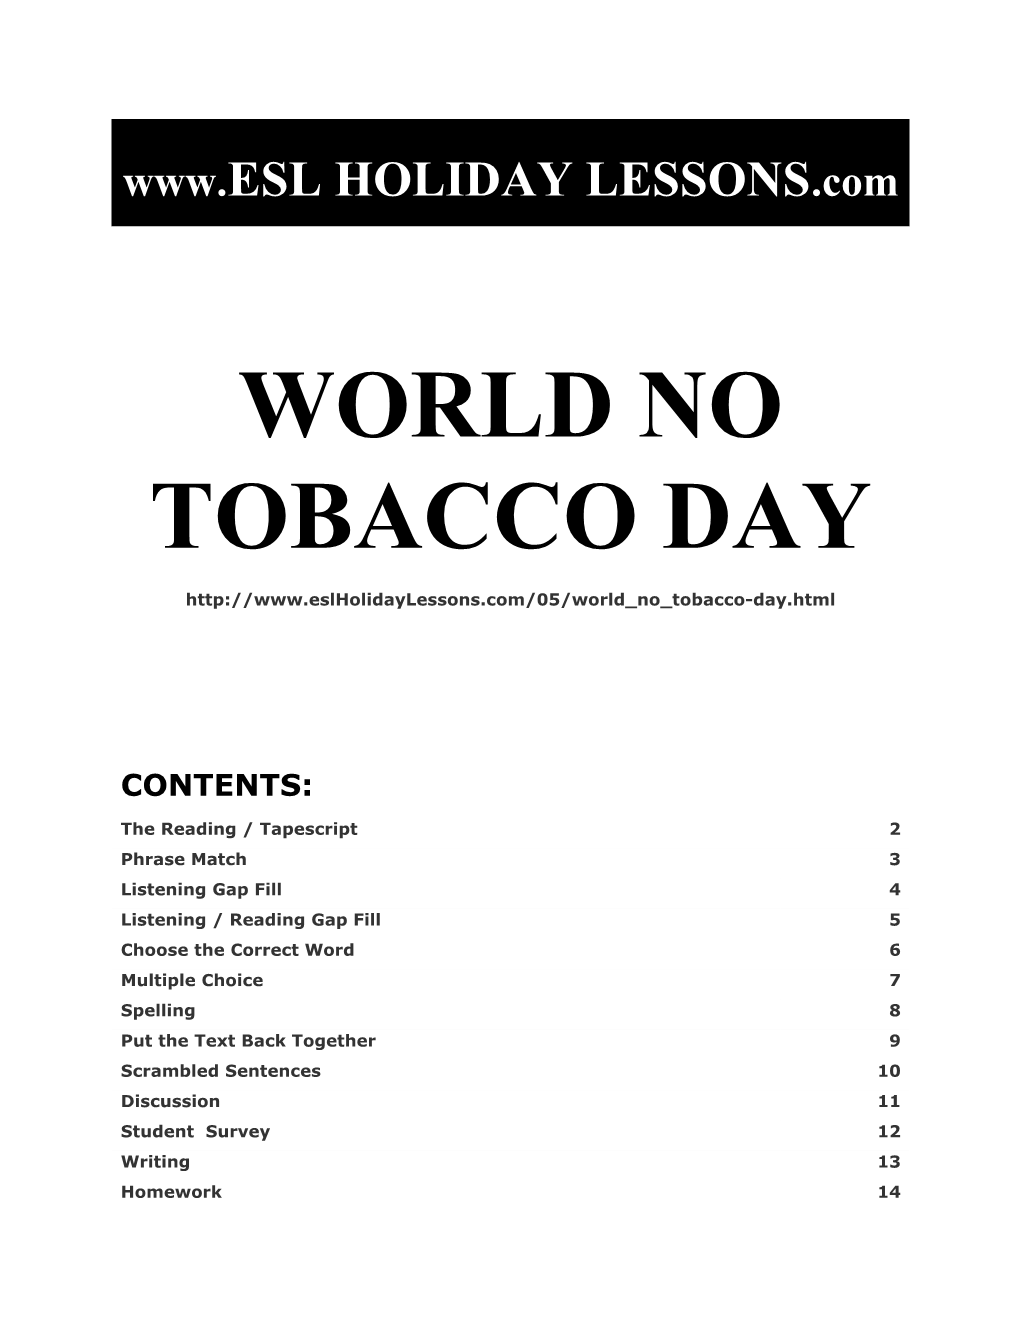 Holiday Lessons - World No Tobacco Day